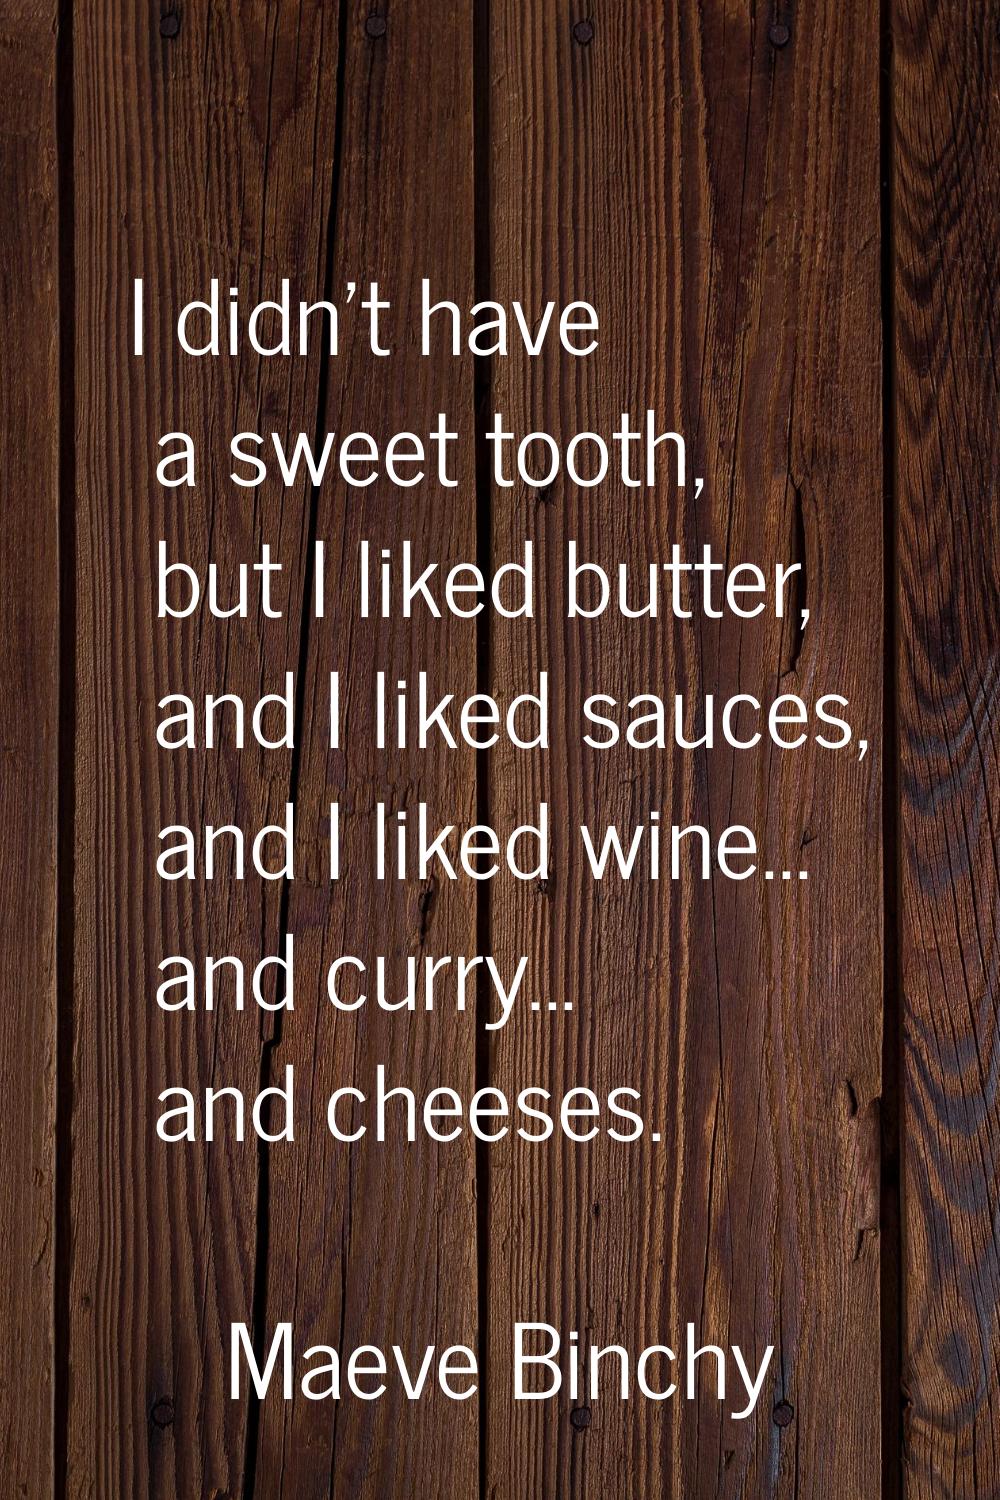 I didn't have a sweet tooth, but I liked butter, and I liked sauces, and I liked wine... and curry.